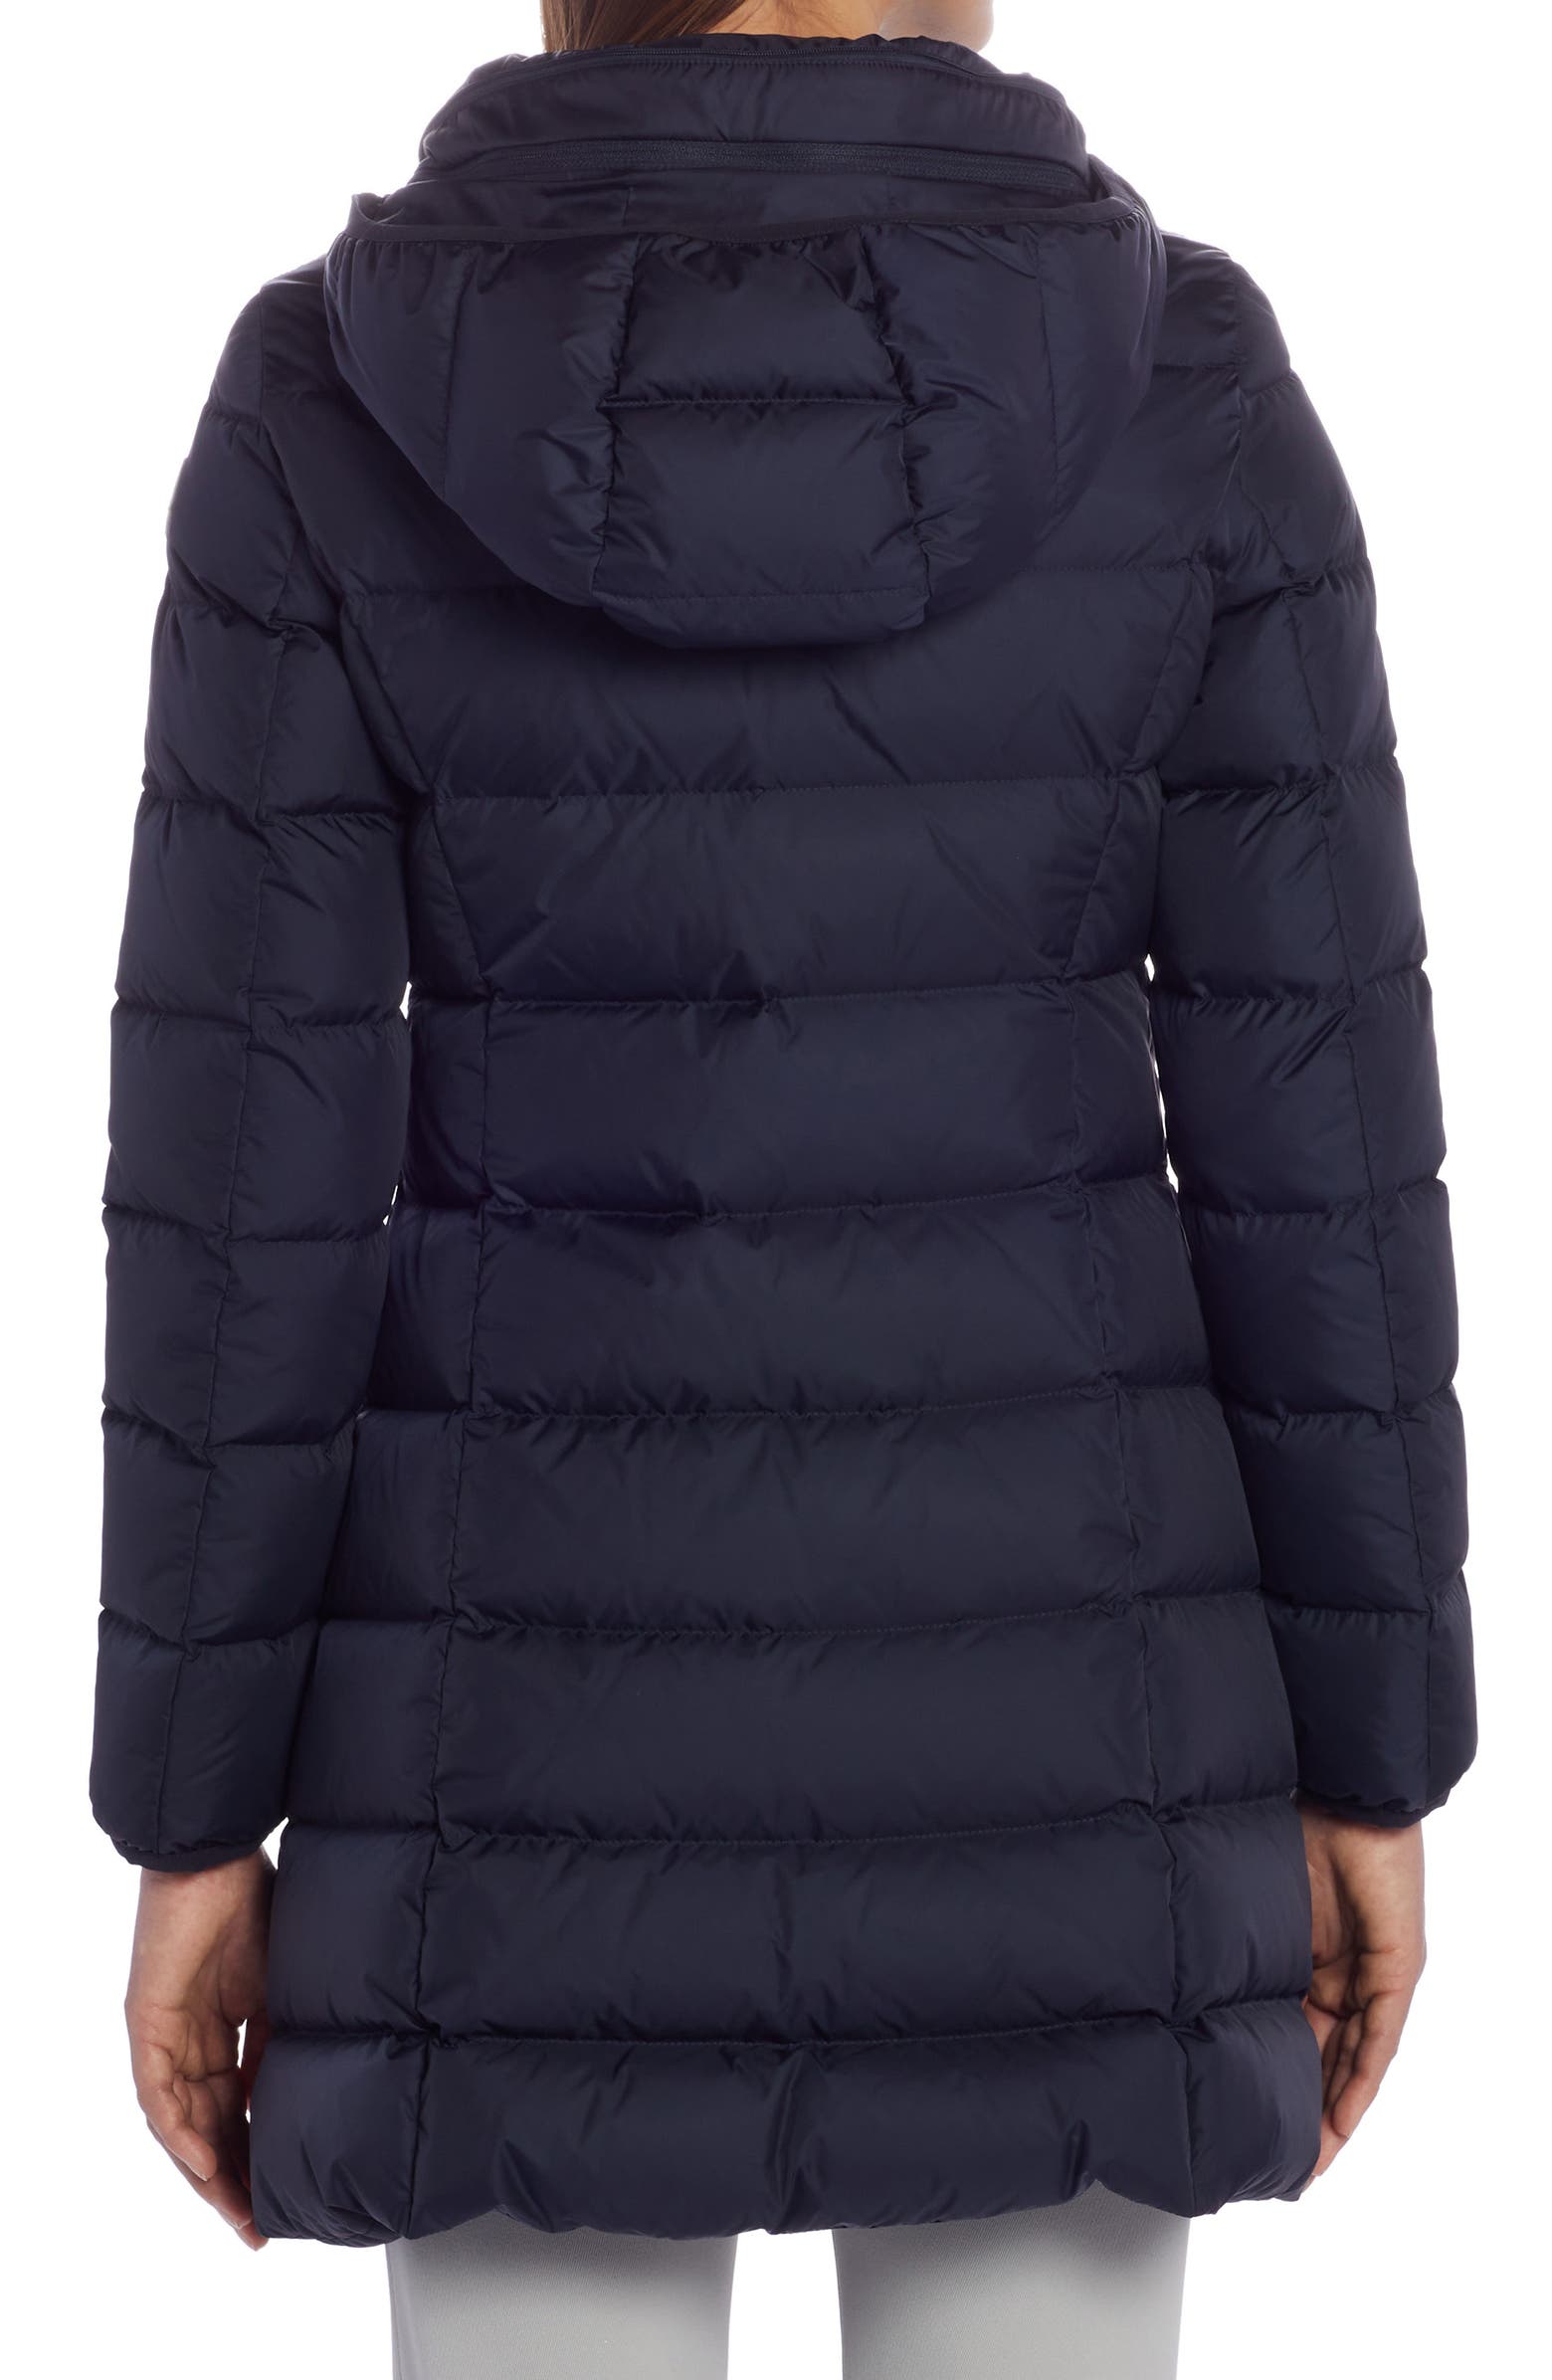 Moncler Gie Quilted Water Repellent Down Coat | Nordstrom